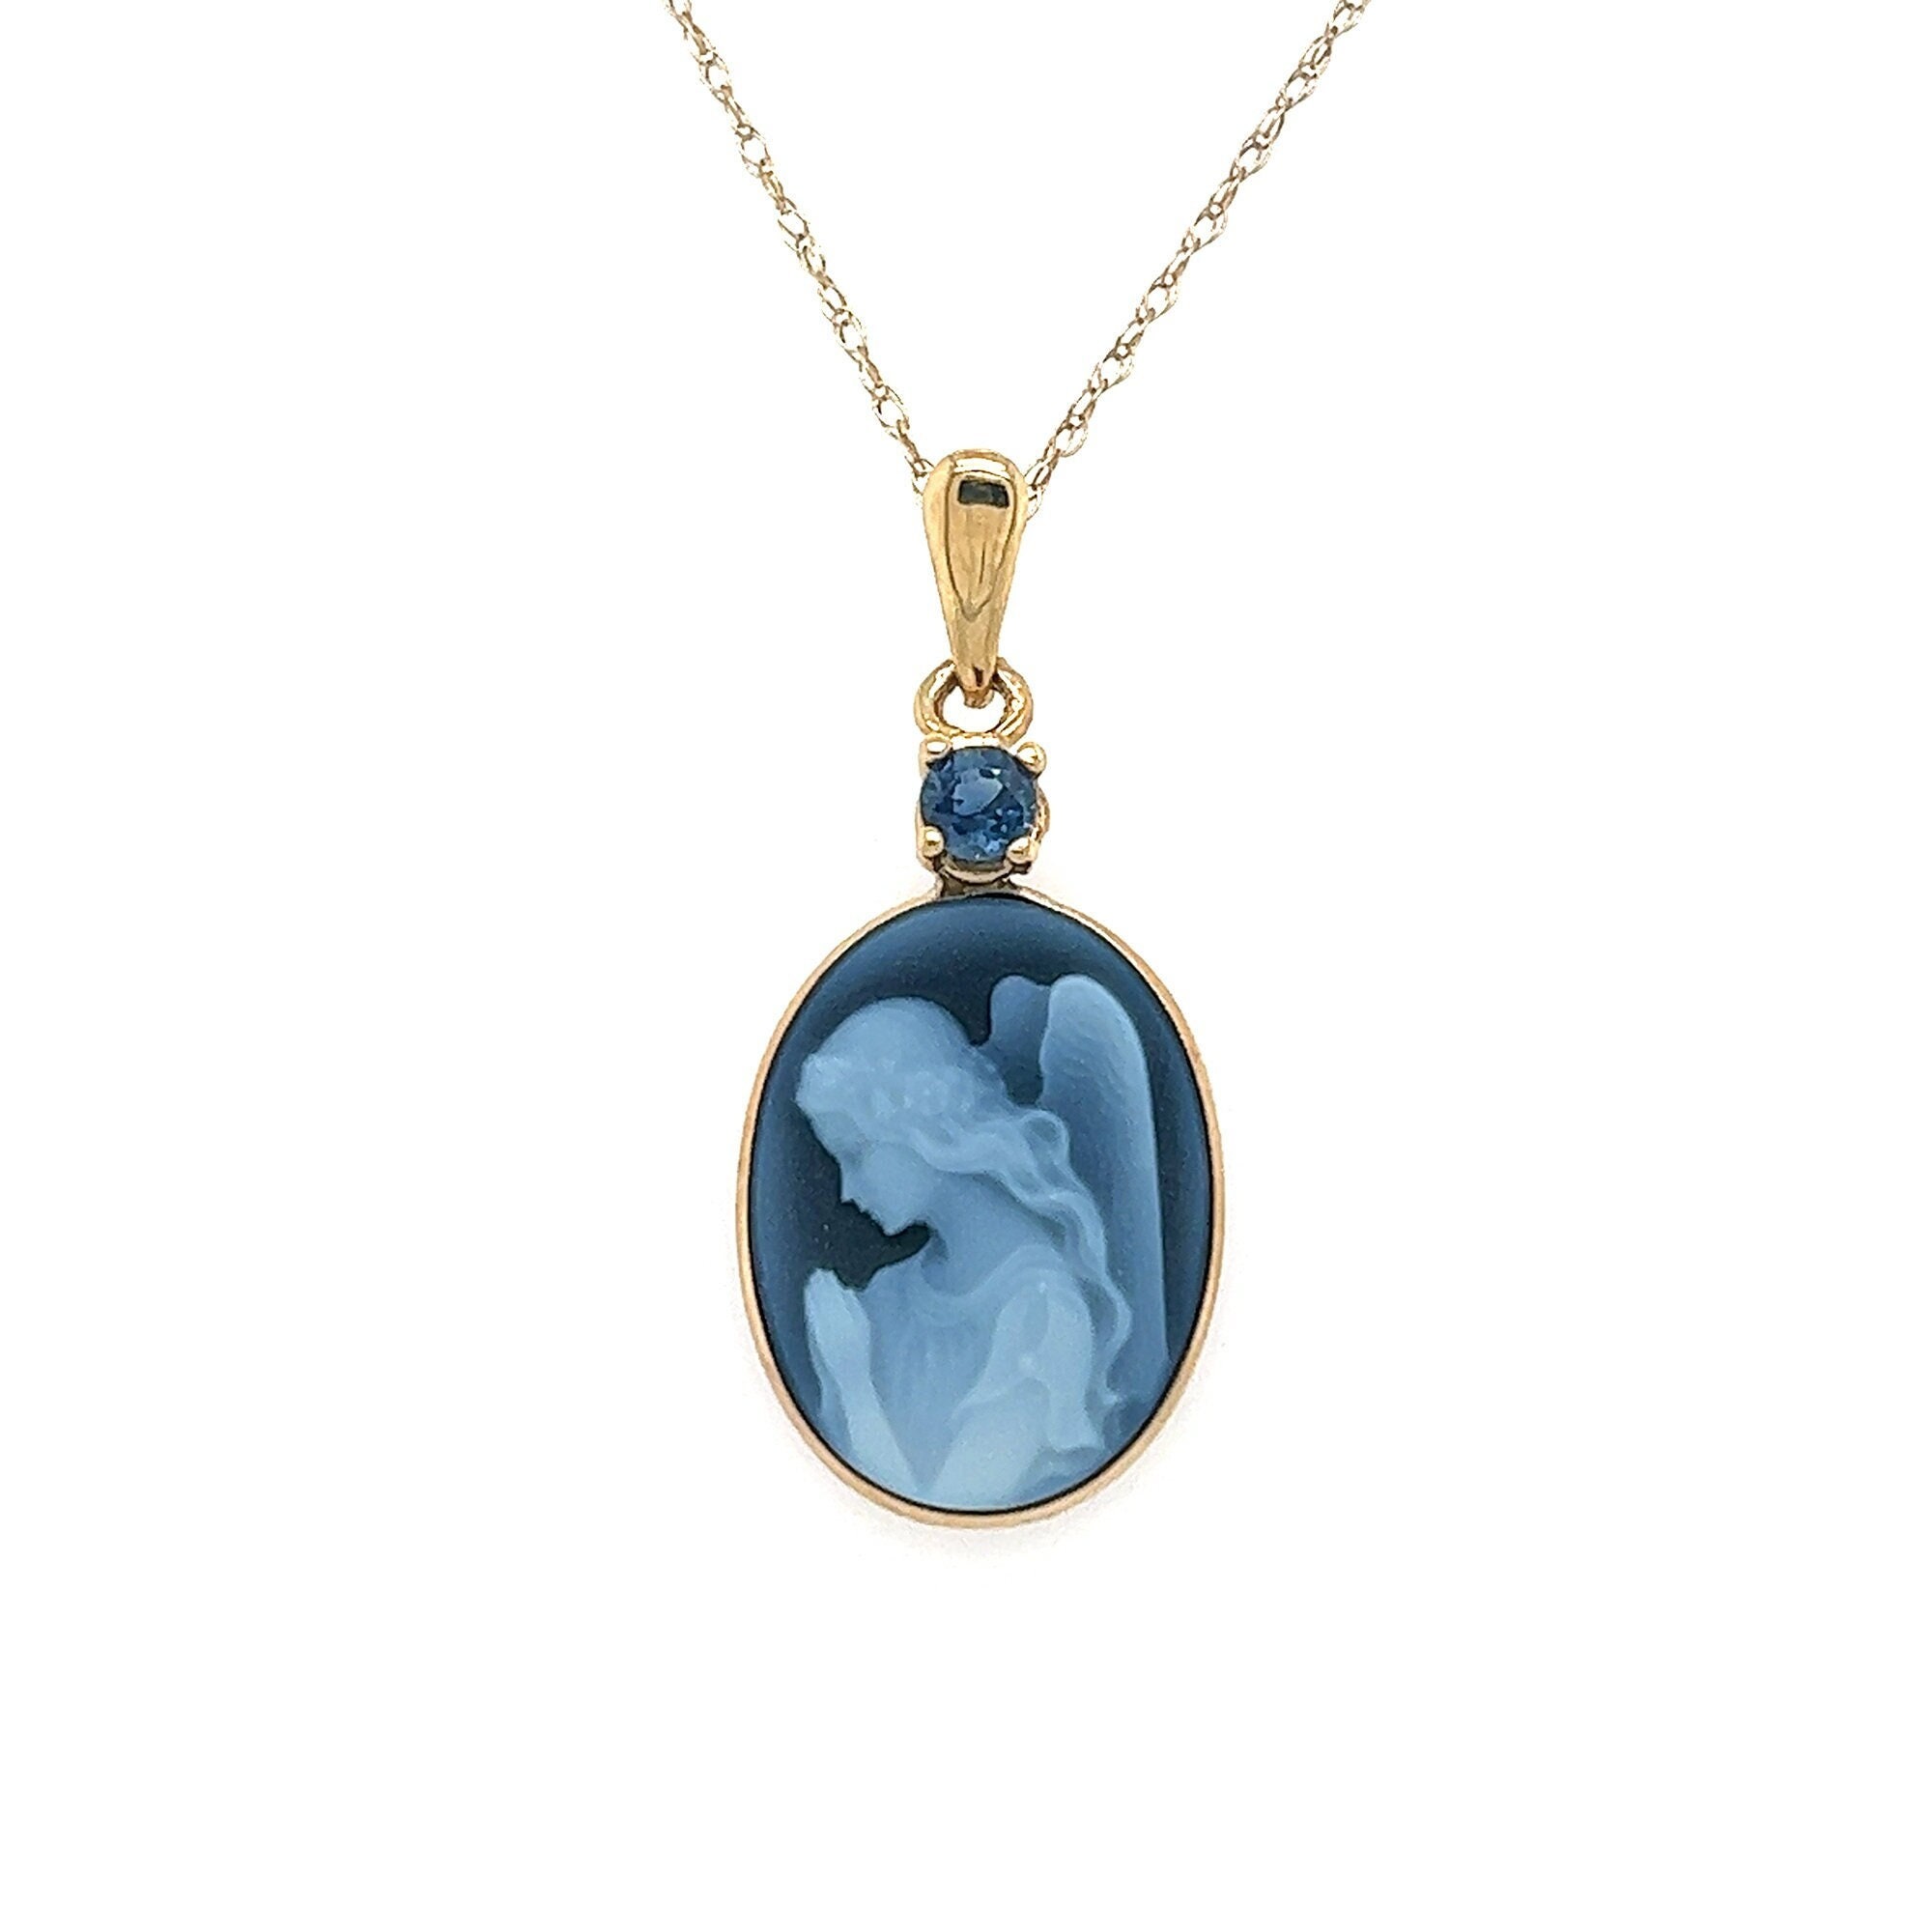 Large Blue Lady Cameo Necklace for Women, Cameo Jewelry With Large Blue  Cameos, Silver or Gold Settings, Victorian Lady Cameos 